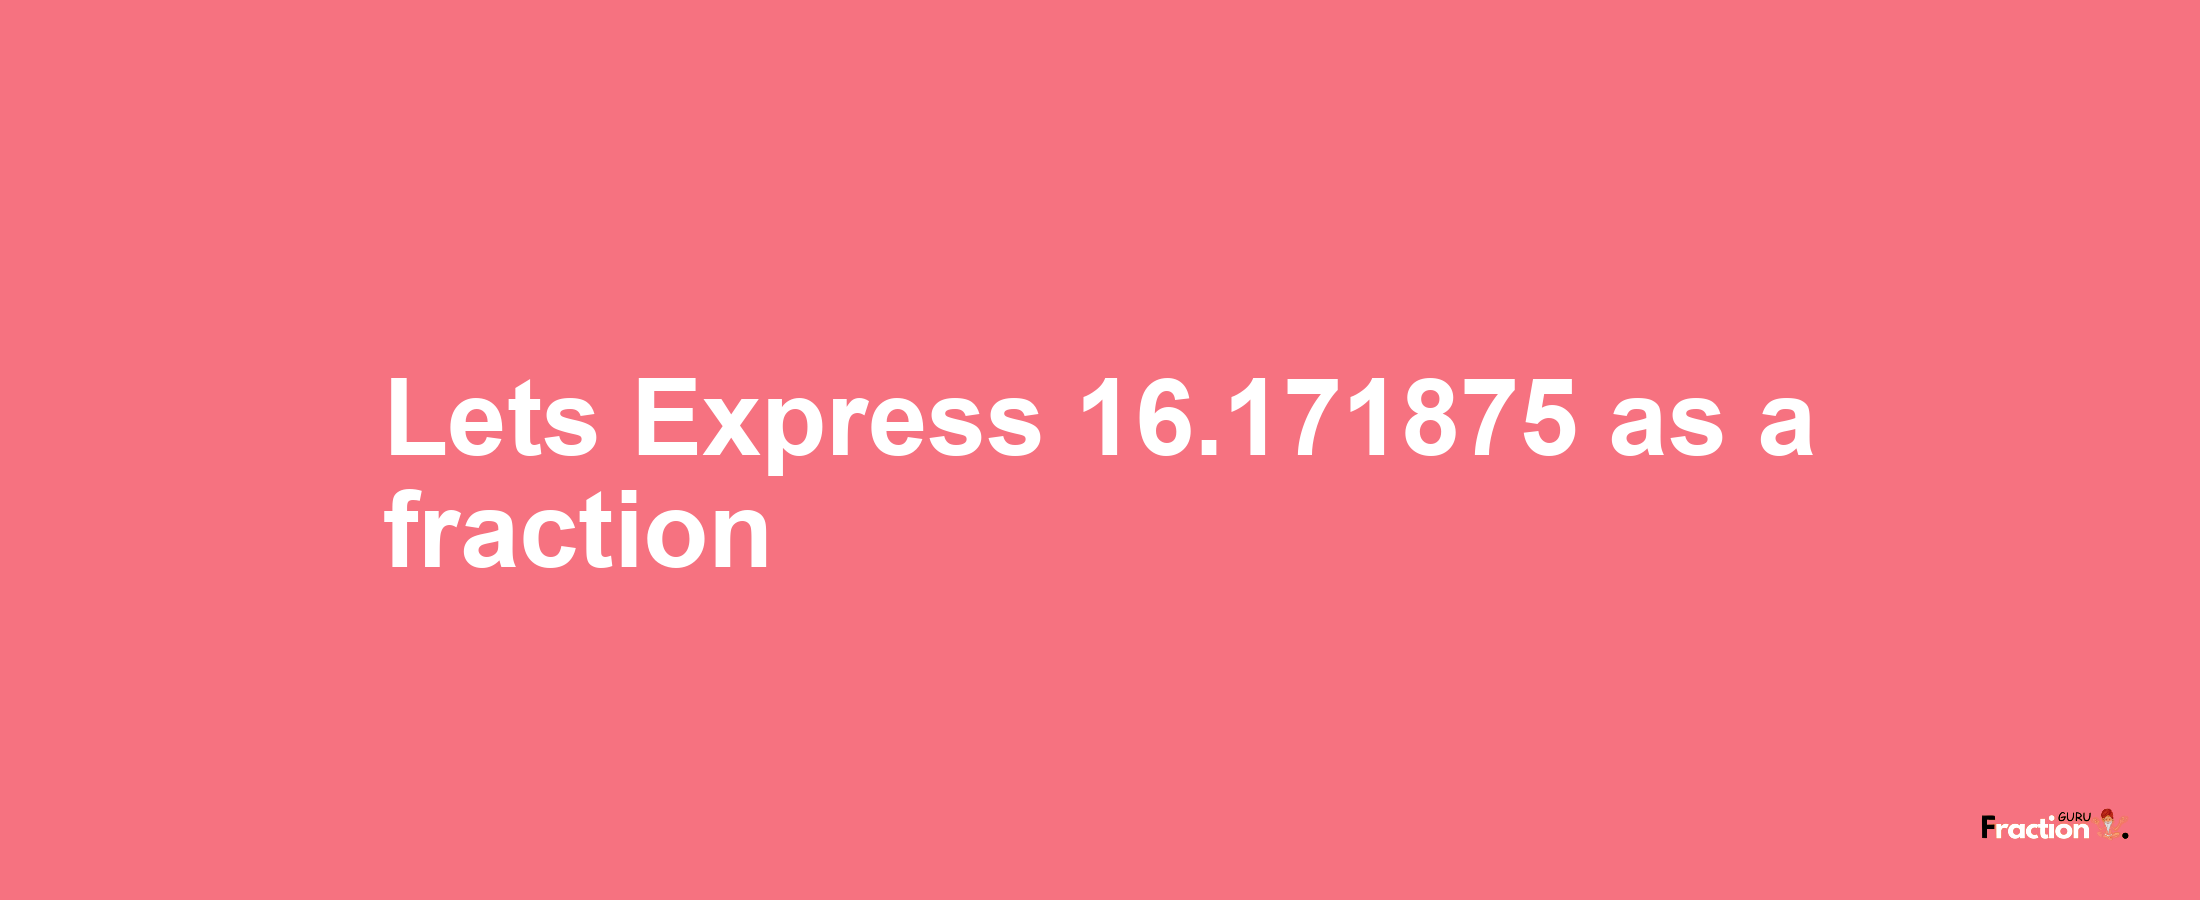 Lets Express 16.171875 as afraction